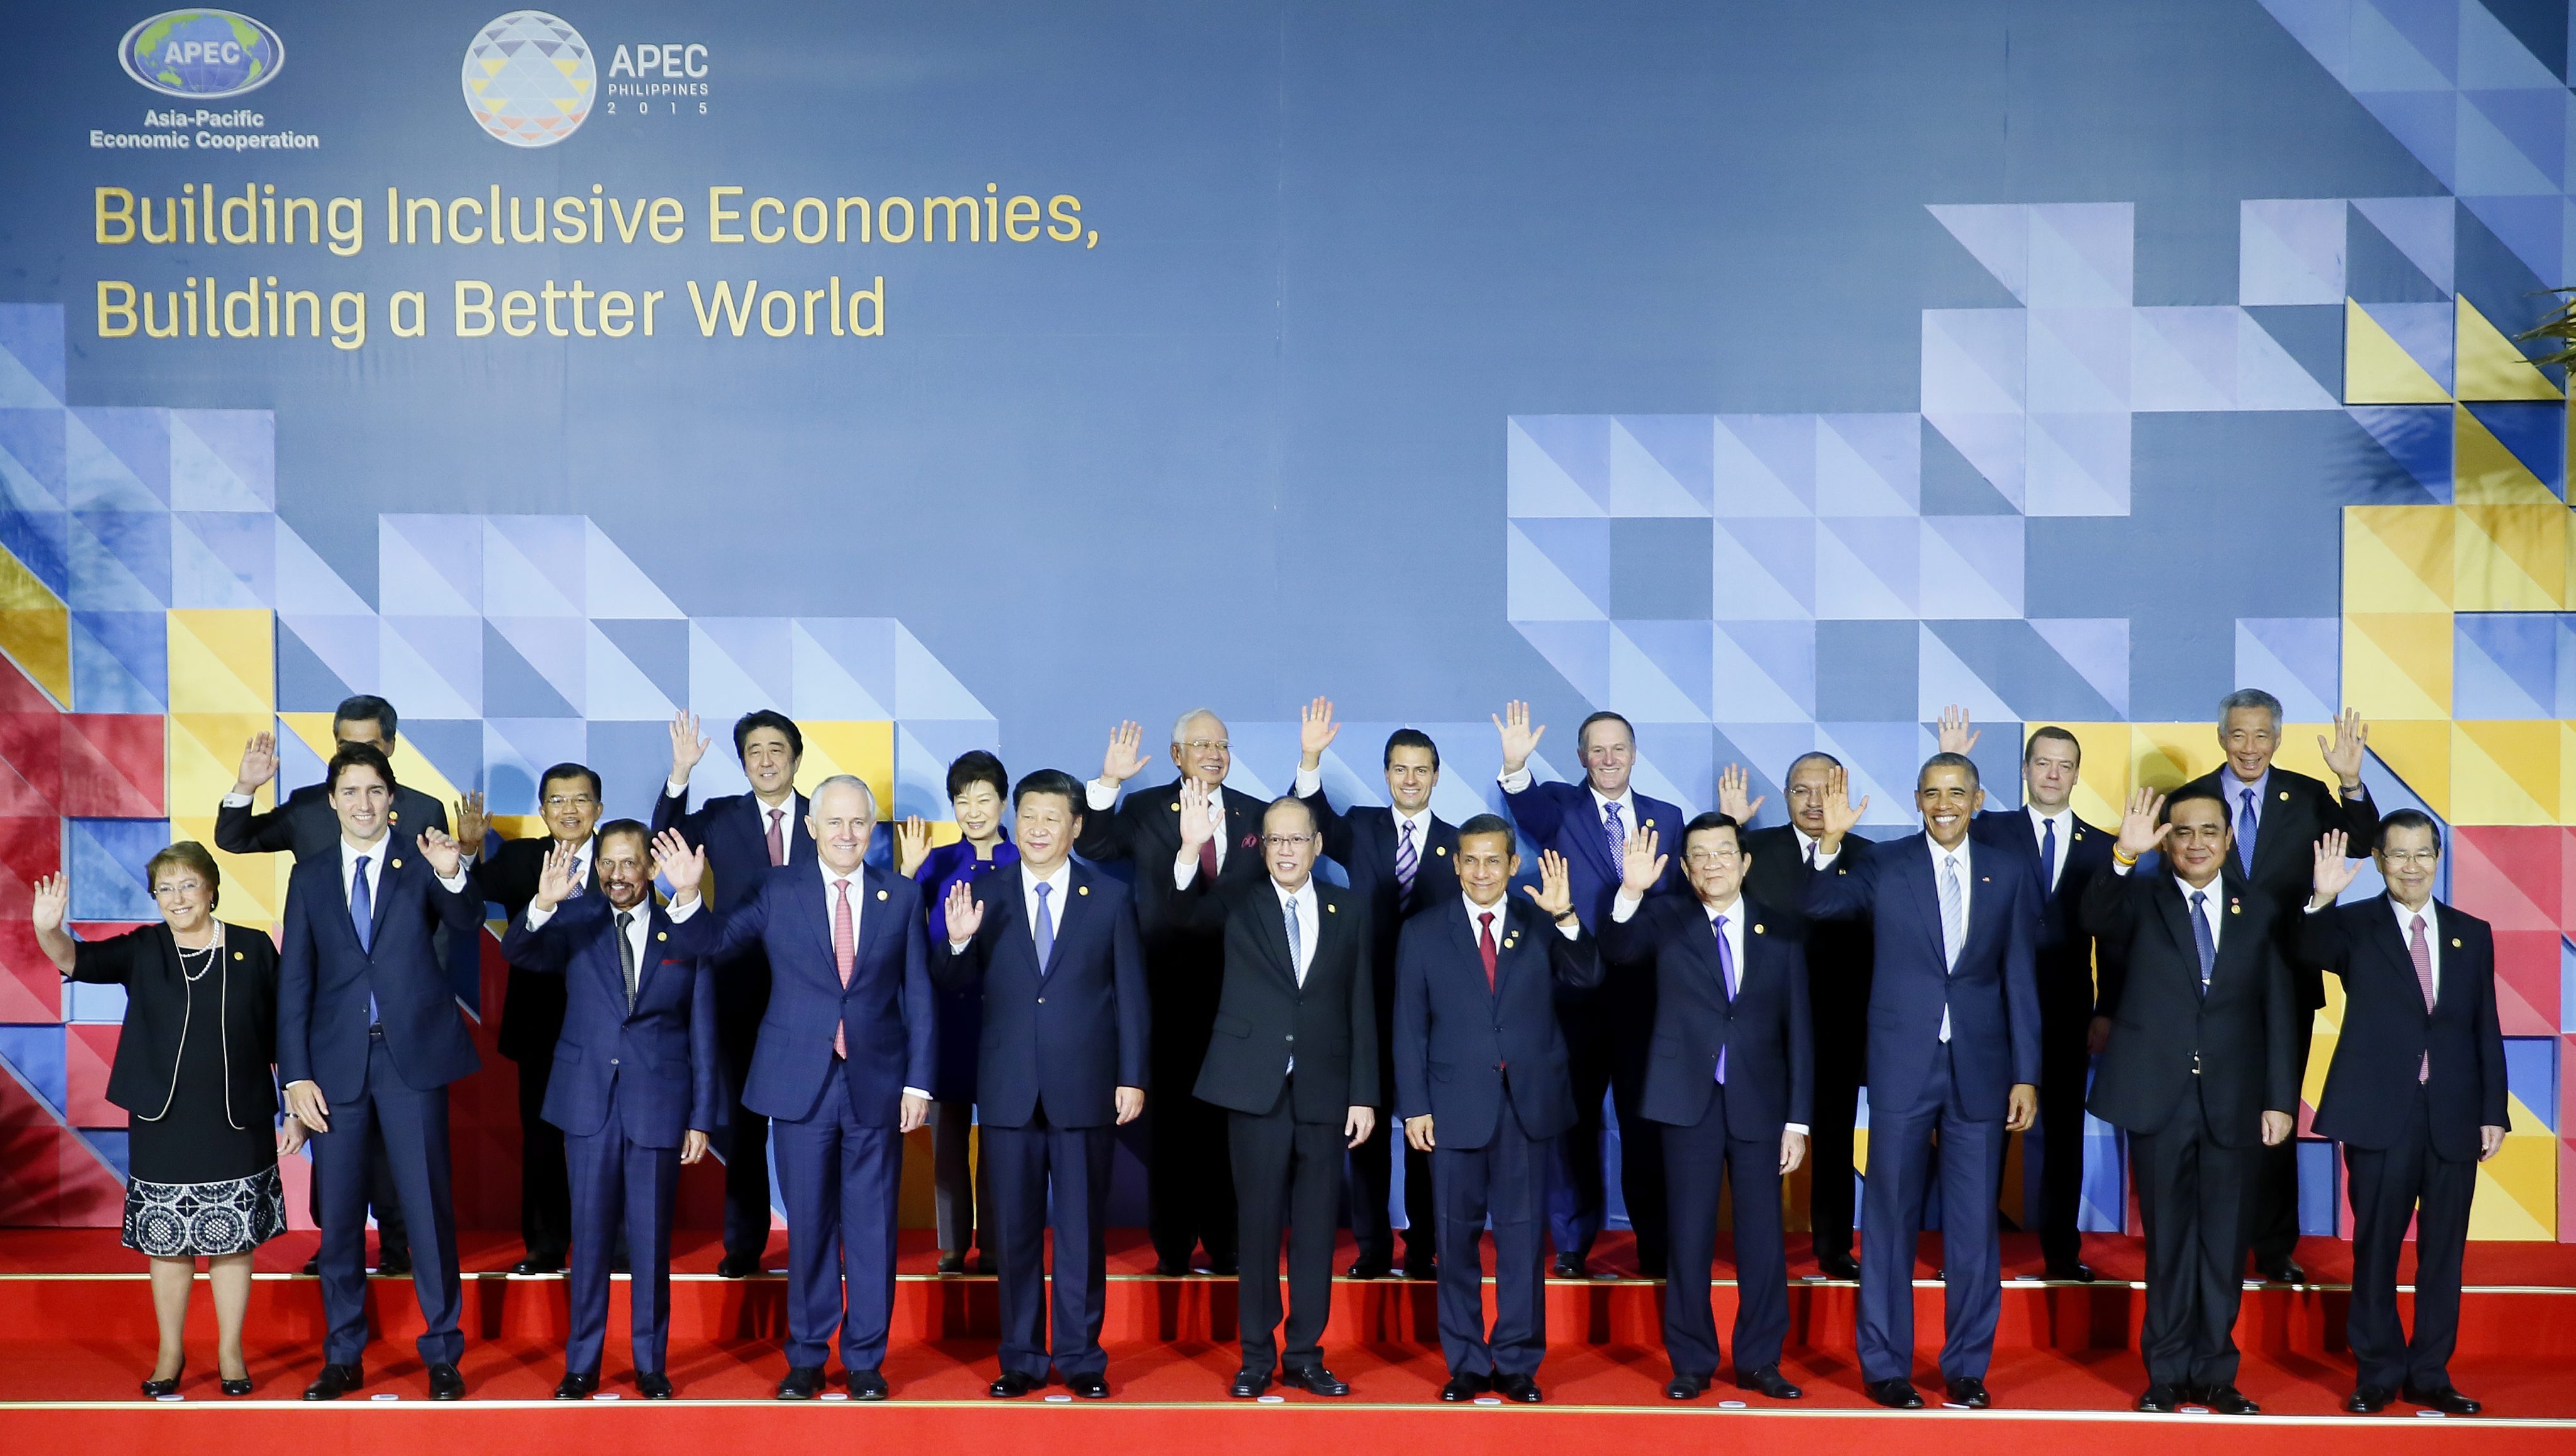 epa05032042 Leaders pose for a group family photo at the Asia-Pacific Economic Cooperation (APEC) summit in Manila, Philippines, 19 November 2015. In picture from top left, Hong Kong's Chief Executive is Leung Chun-ying, Indonesian Vice President Jusuf Kalla, Japanese Prime Minister Shinzo Abe, South Korea President Park Geun-hye, Malaysian Prime Minister Najib Razak, Mexican President Enrique Pena Nieto, New Zealand Prime Minister John Key, Papua New Guinea Prime Minister Peter O'Neill, Prime Minister Dmitry Medvedev, Singapore Prime Minister Lee Hsien Loong. front row from left, Chile's President Michelle Bachelet, Canadian Prime Minister Justin Trudeau, Sultan of Brunei Sultan Hassanal Bolkiah, Australian Prime Minister Malcolm Turnbull, Chinese President Xi Jinping, Philippines President Benigno Aquino III, Peru's President Ollanta Humala, Vietnam's President Truong Tan Sang, US President Barack Obama, Thailand's Prime Minister Prayut Chan-o-cha and Taiwan envoy Vincent Siew. EPA/B